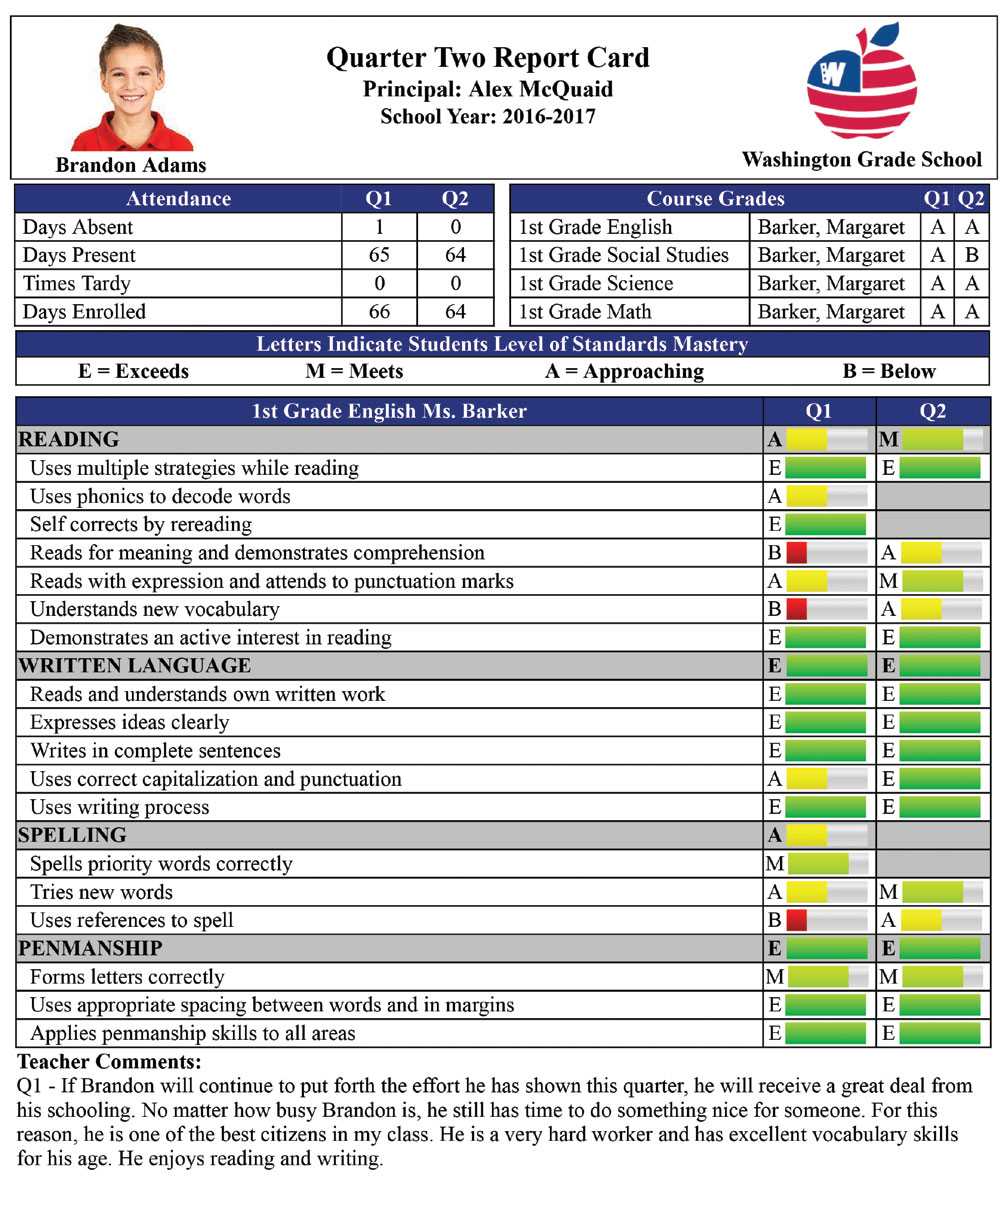 Report Card Creator Plugin For Powerschool Sis - From Mba With Powerschool Reports Templates